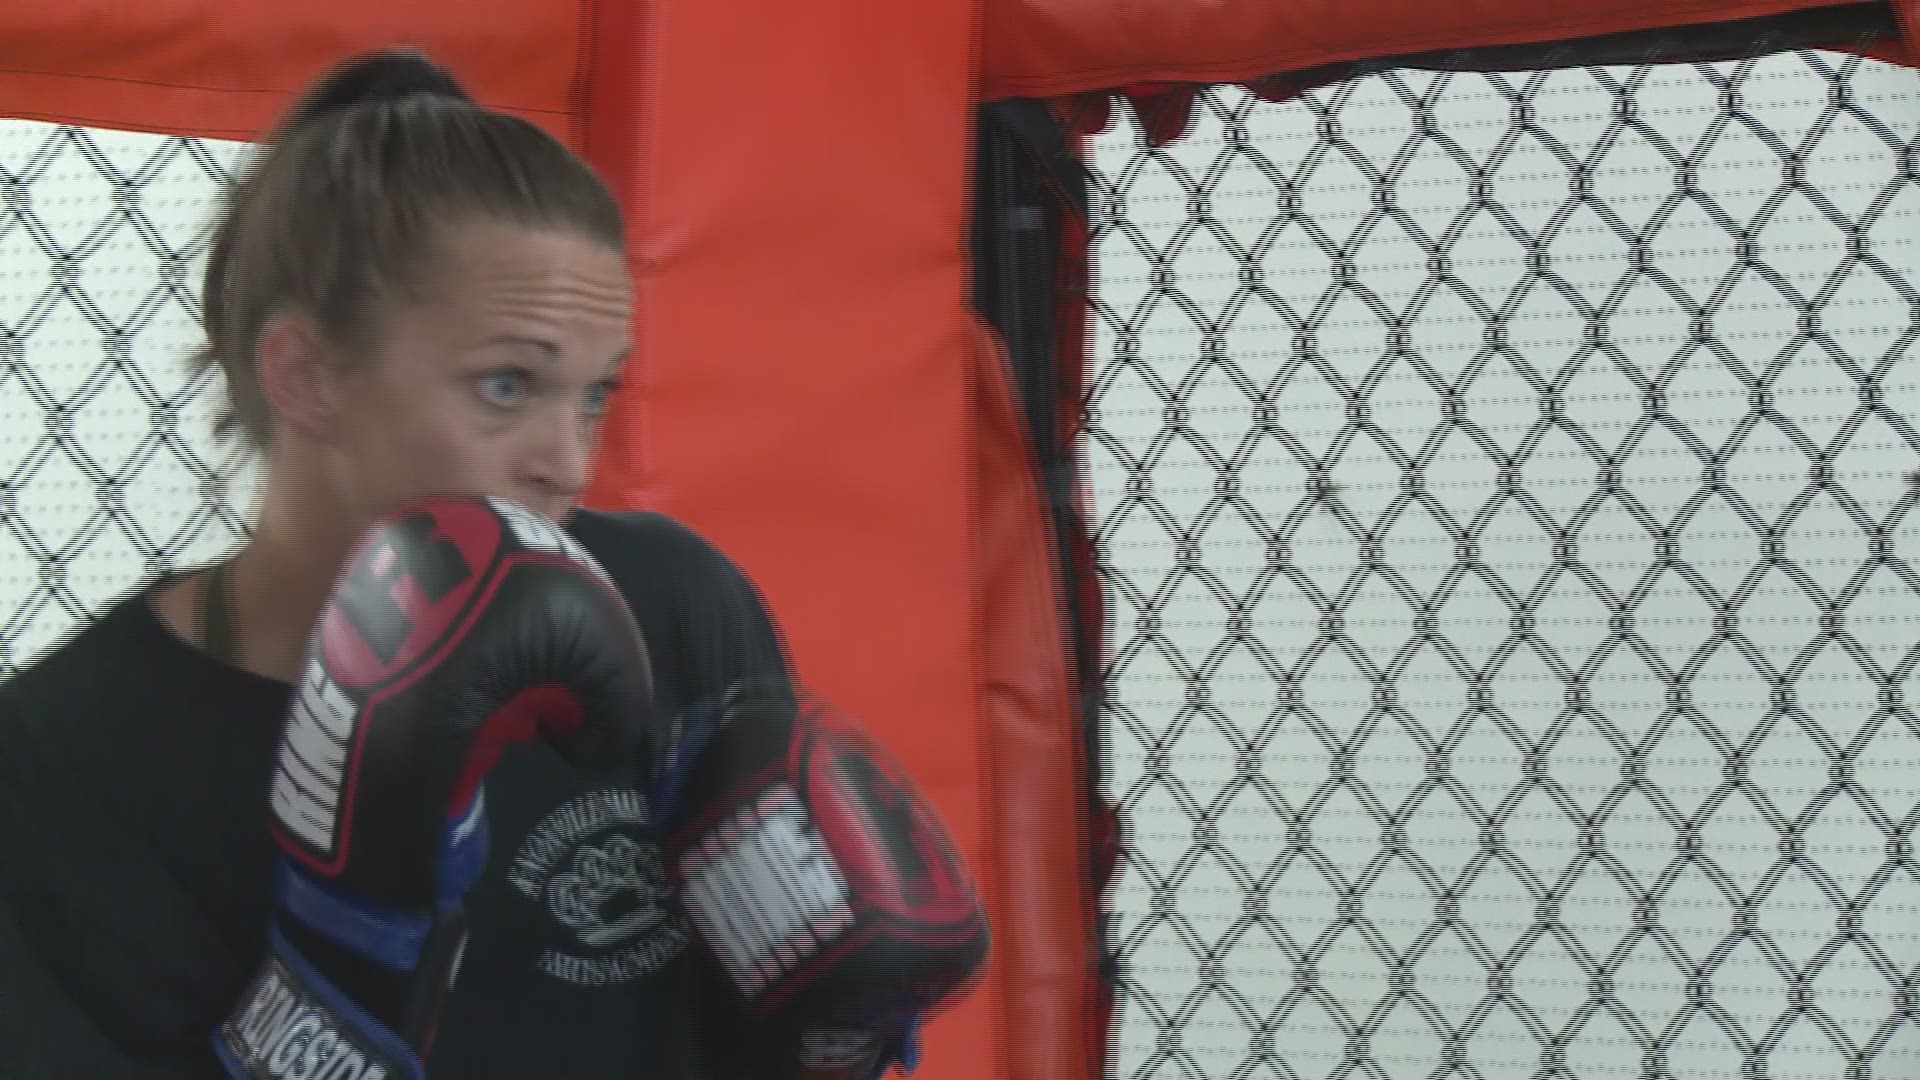 Taylor Turner is ready for the biggest fight in her MMA career at Madison Square Garden. However, it took many steps and challenges to get to this point.